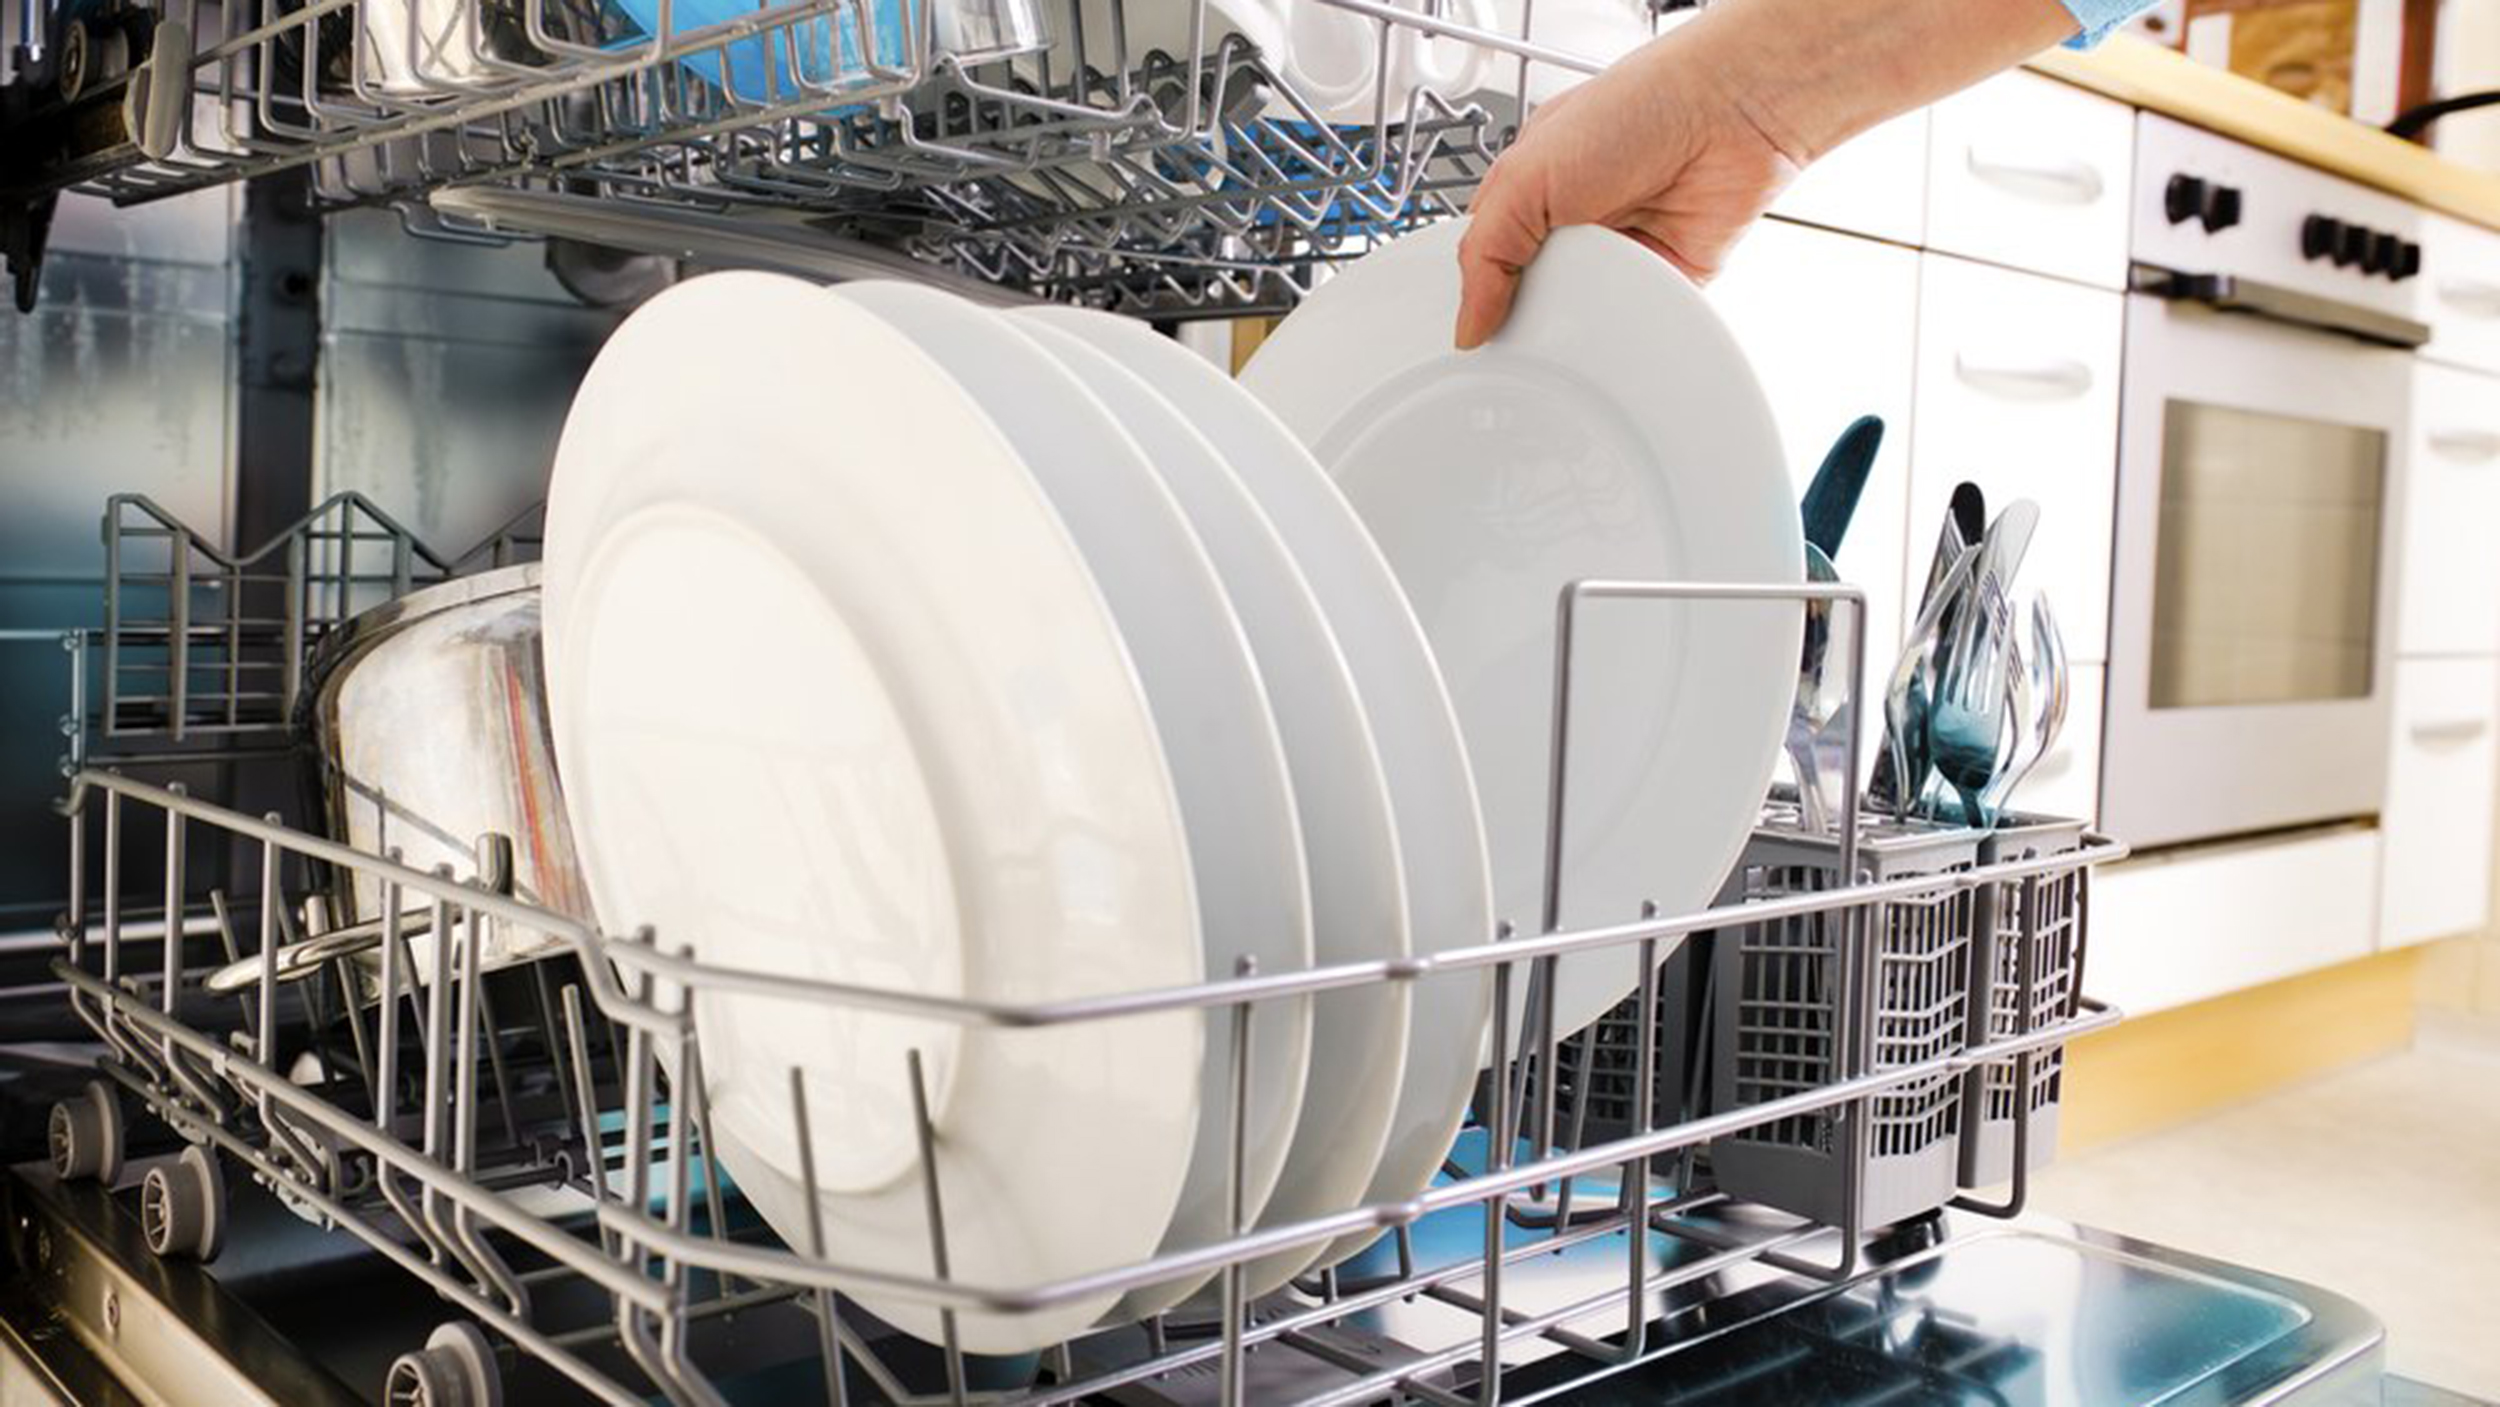 How to buy a dishwasher